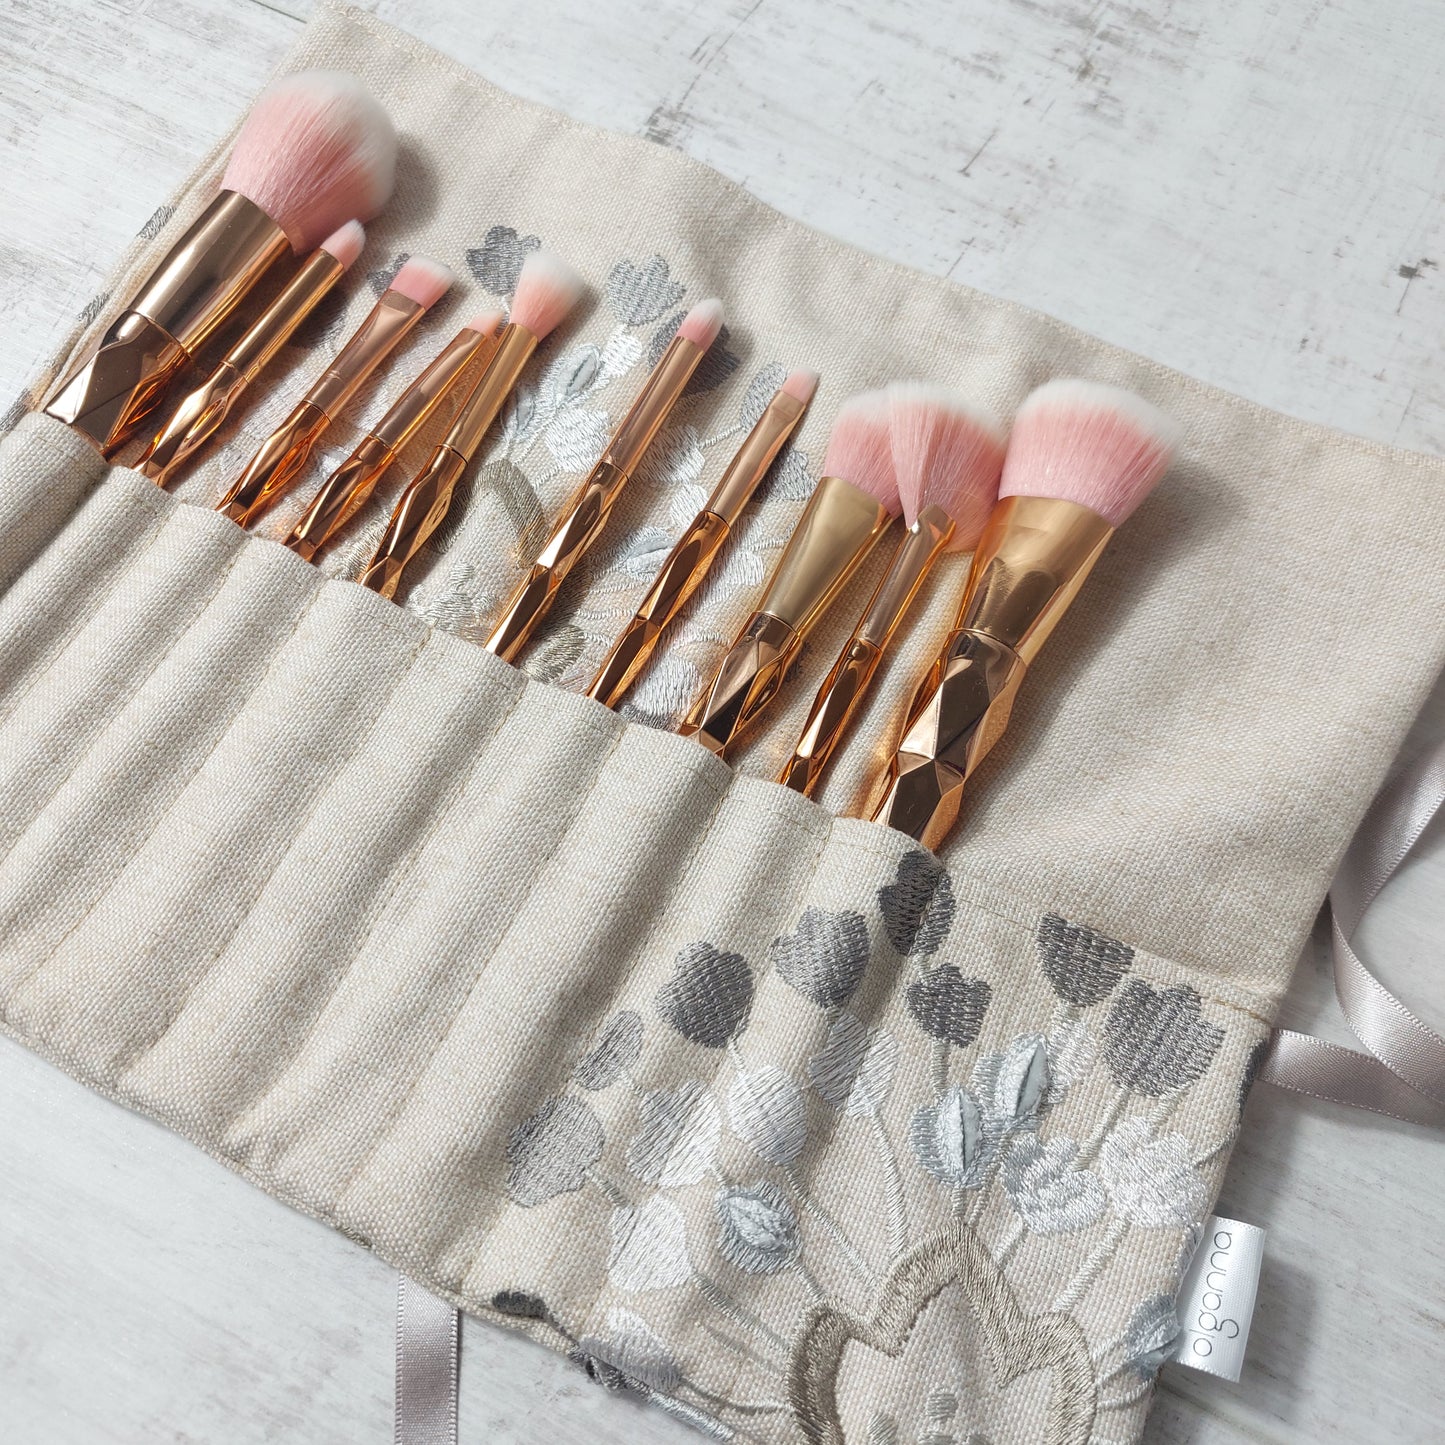 10 Make Up Brushes in a Handmade Case